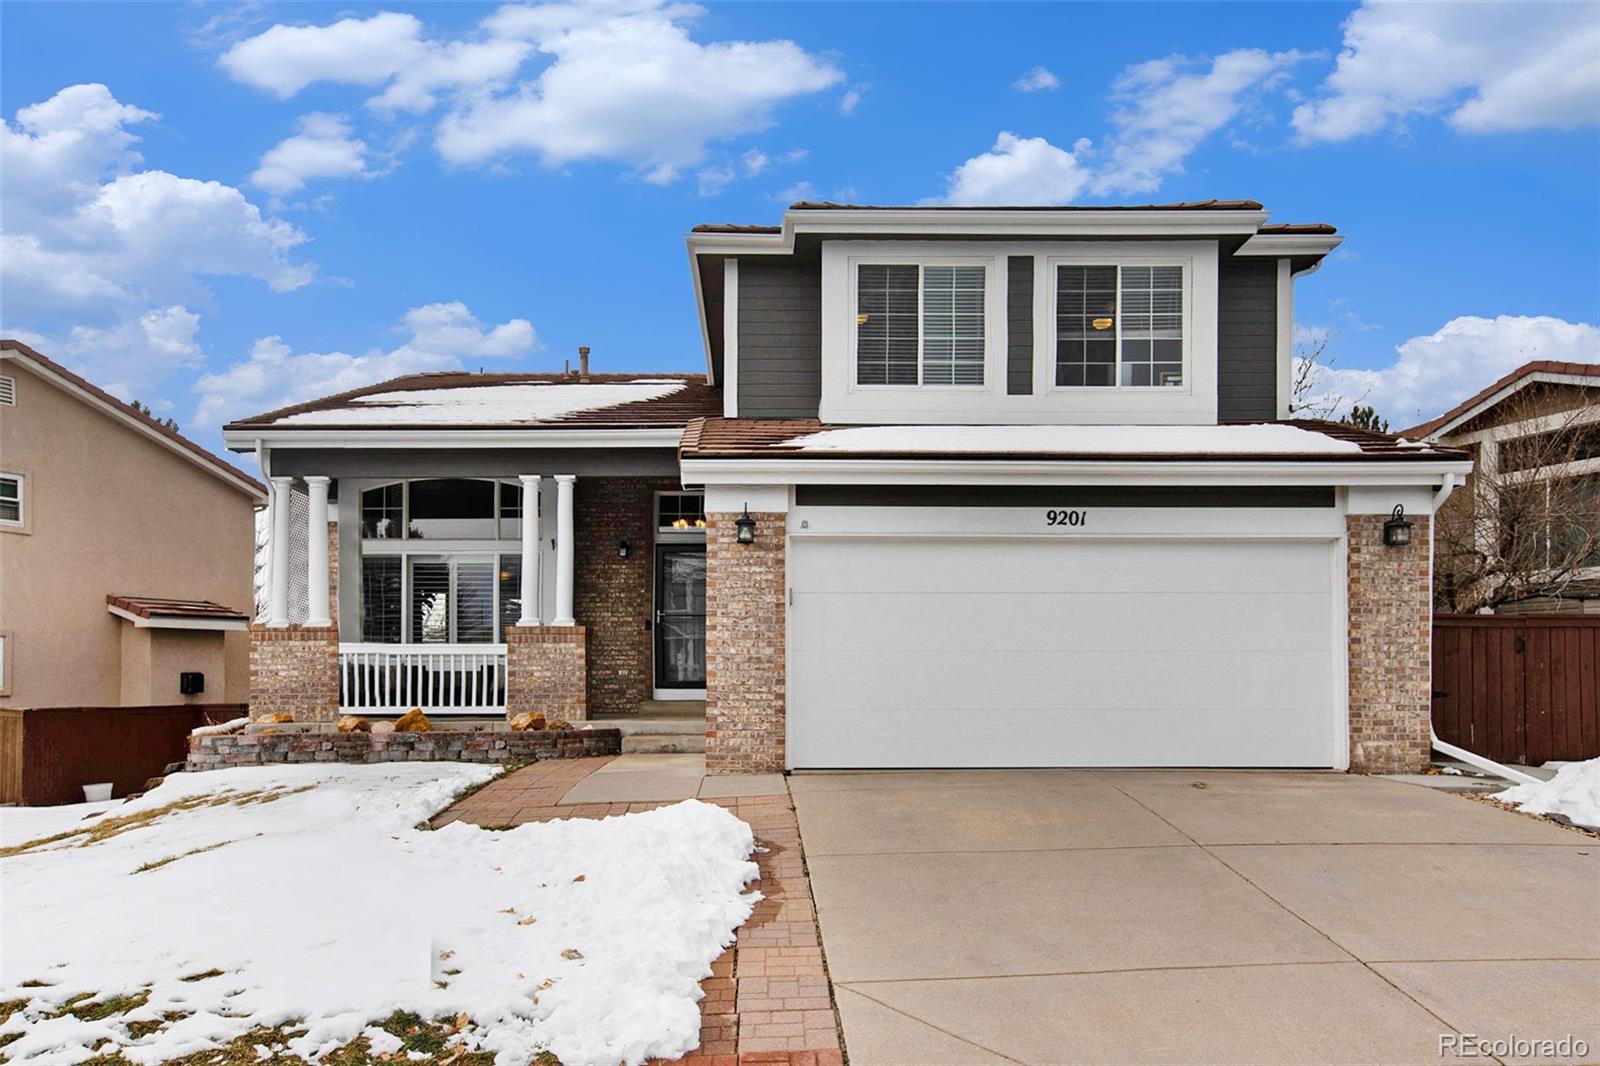 9201  anasazi indian trail, Highlands Ranch sold home. Closed on 2024-02-28 for $691,000.